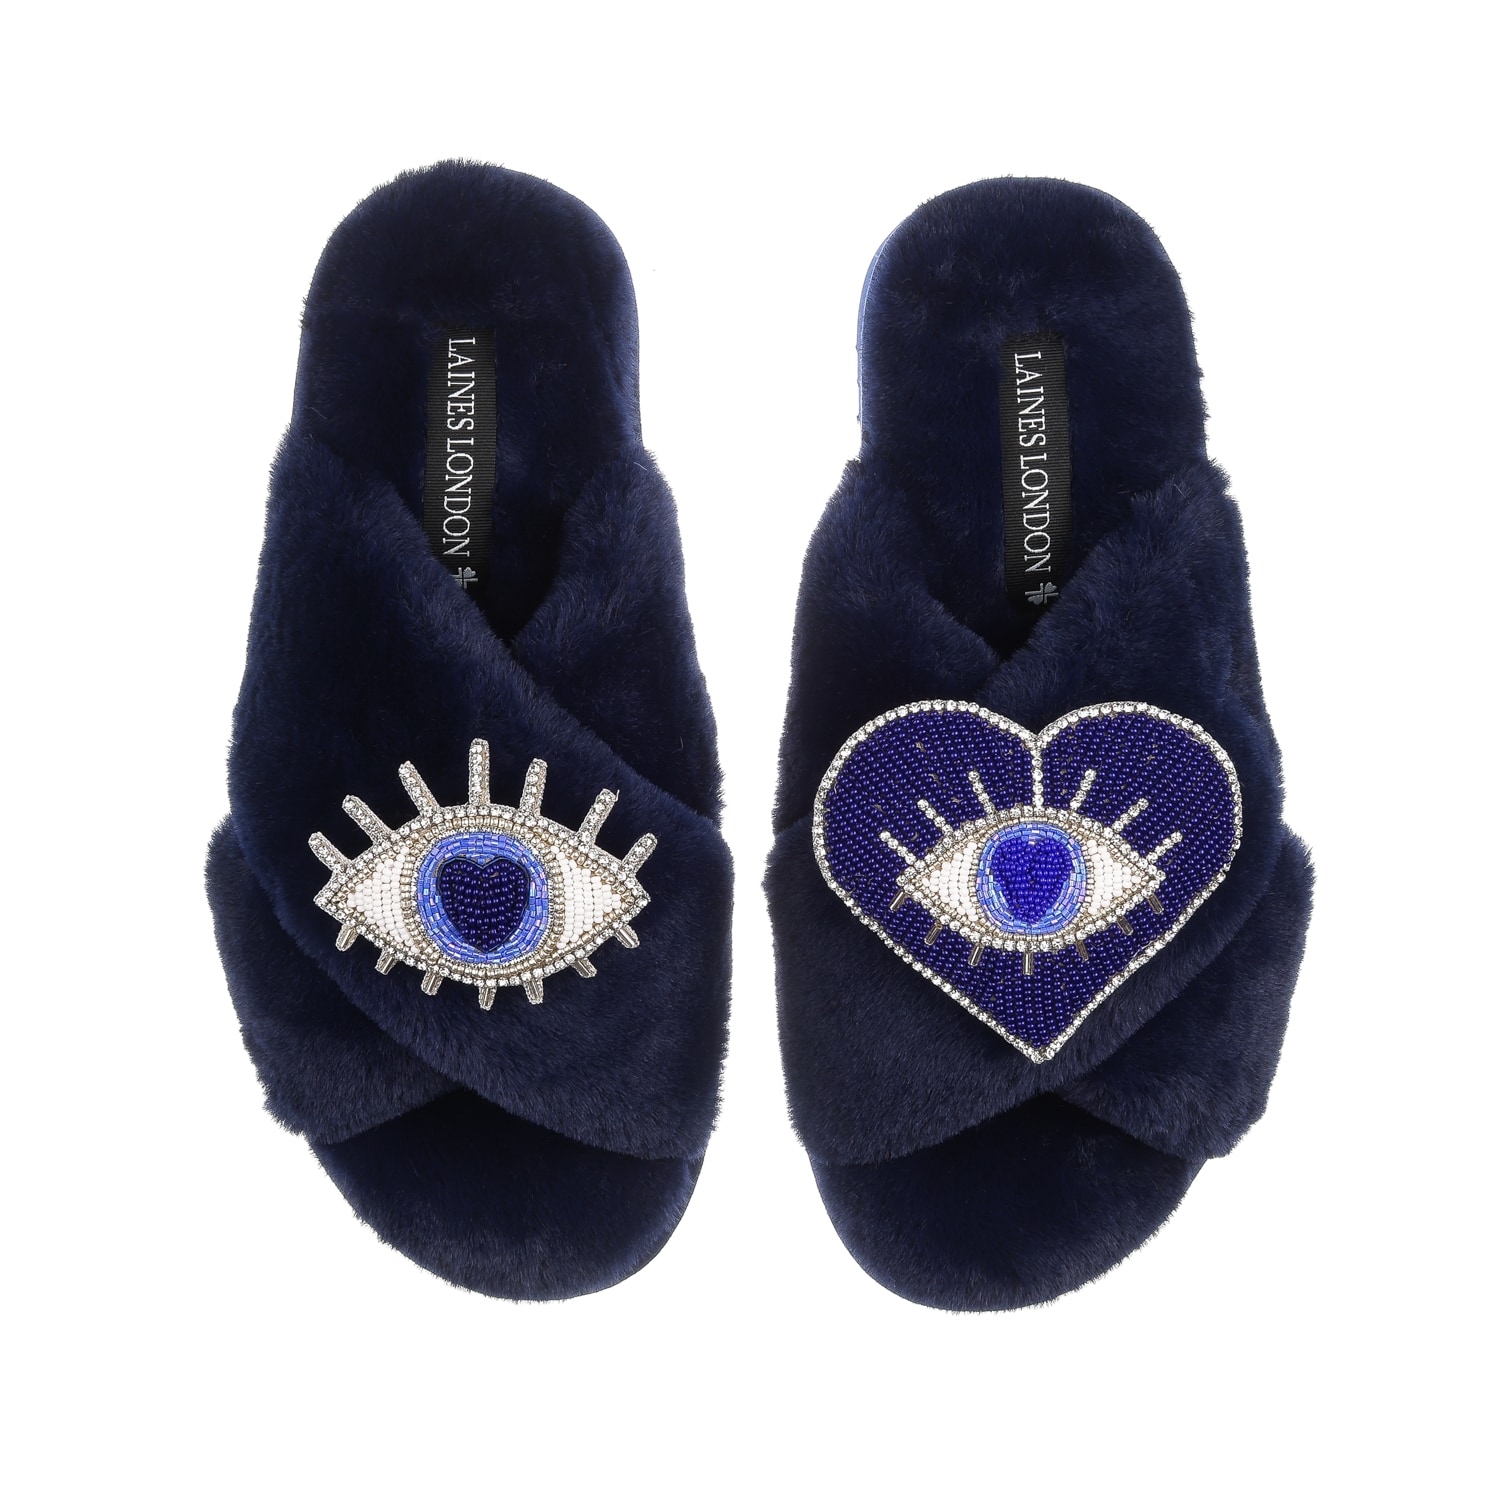 Laines London Women's Classic Laines Slippers With Blue & Silver Double Eye Brooches - Navy